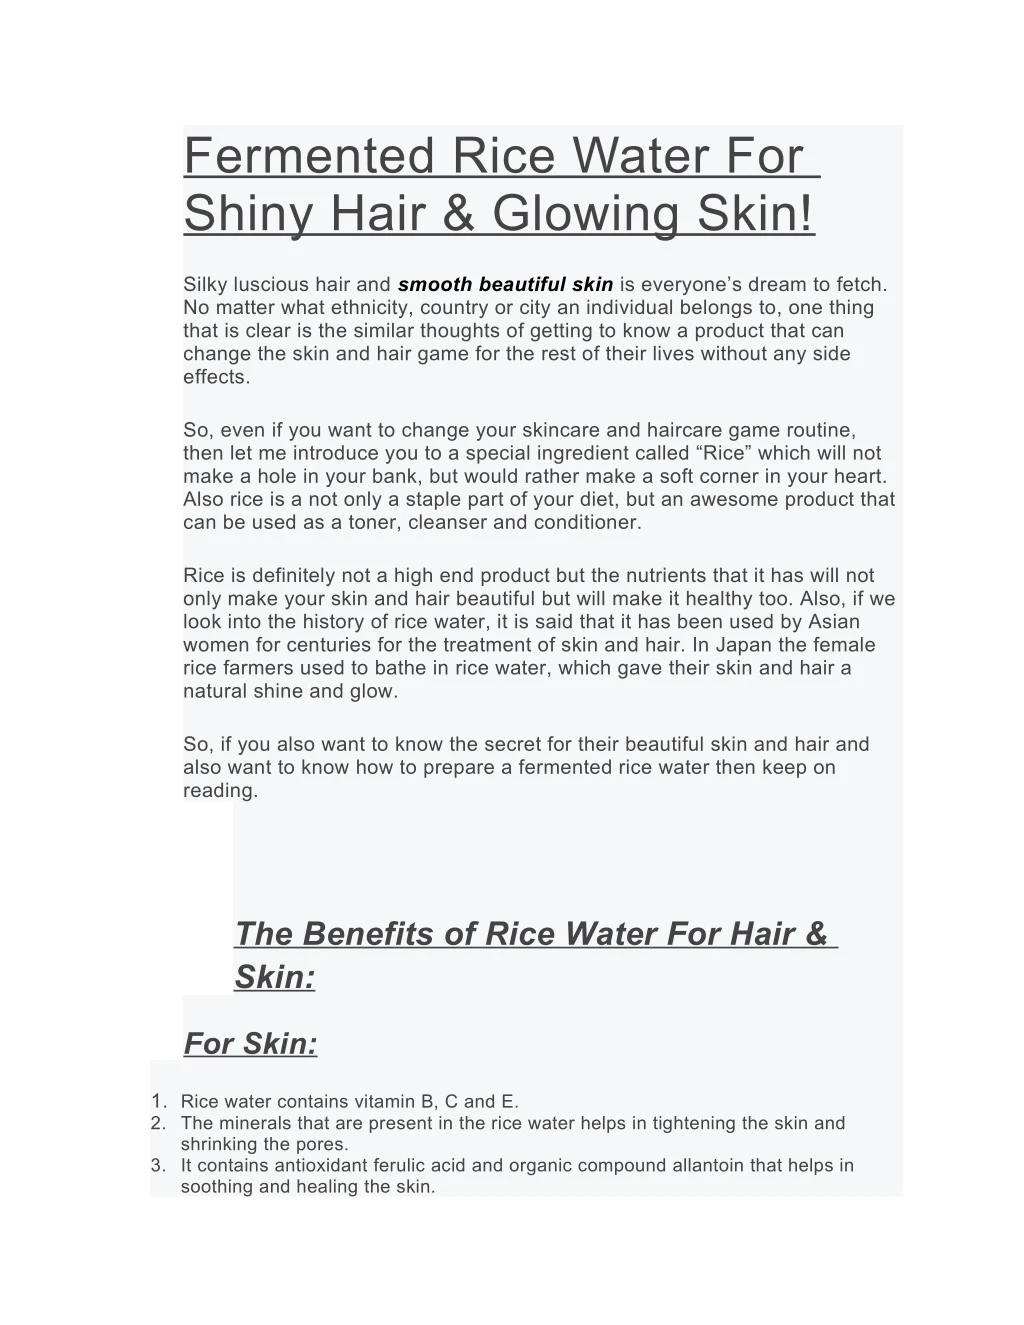 fermented rice water for shiny hair glowing skin